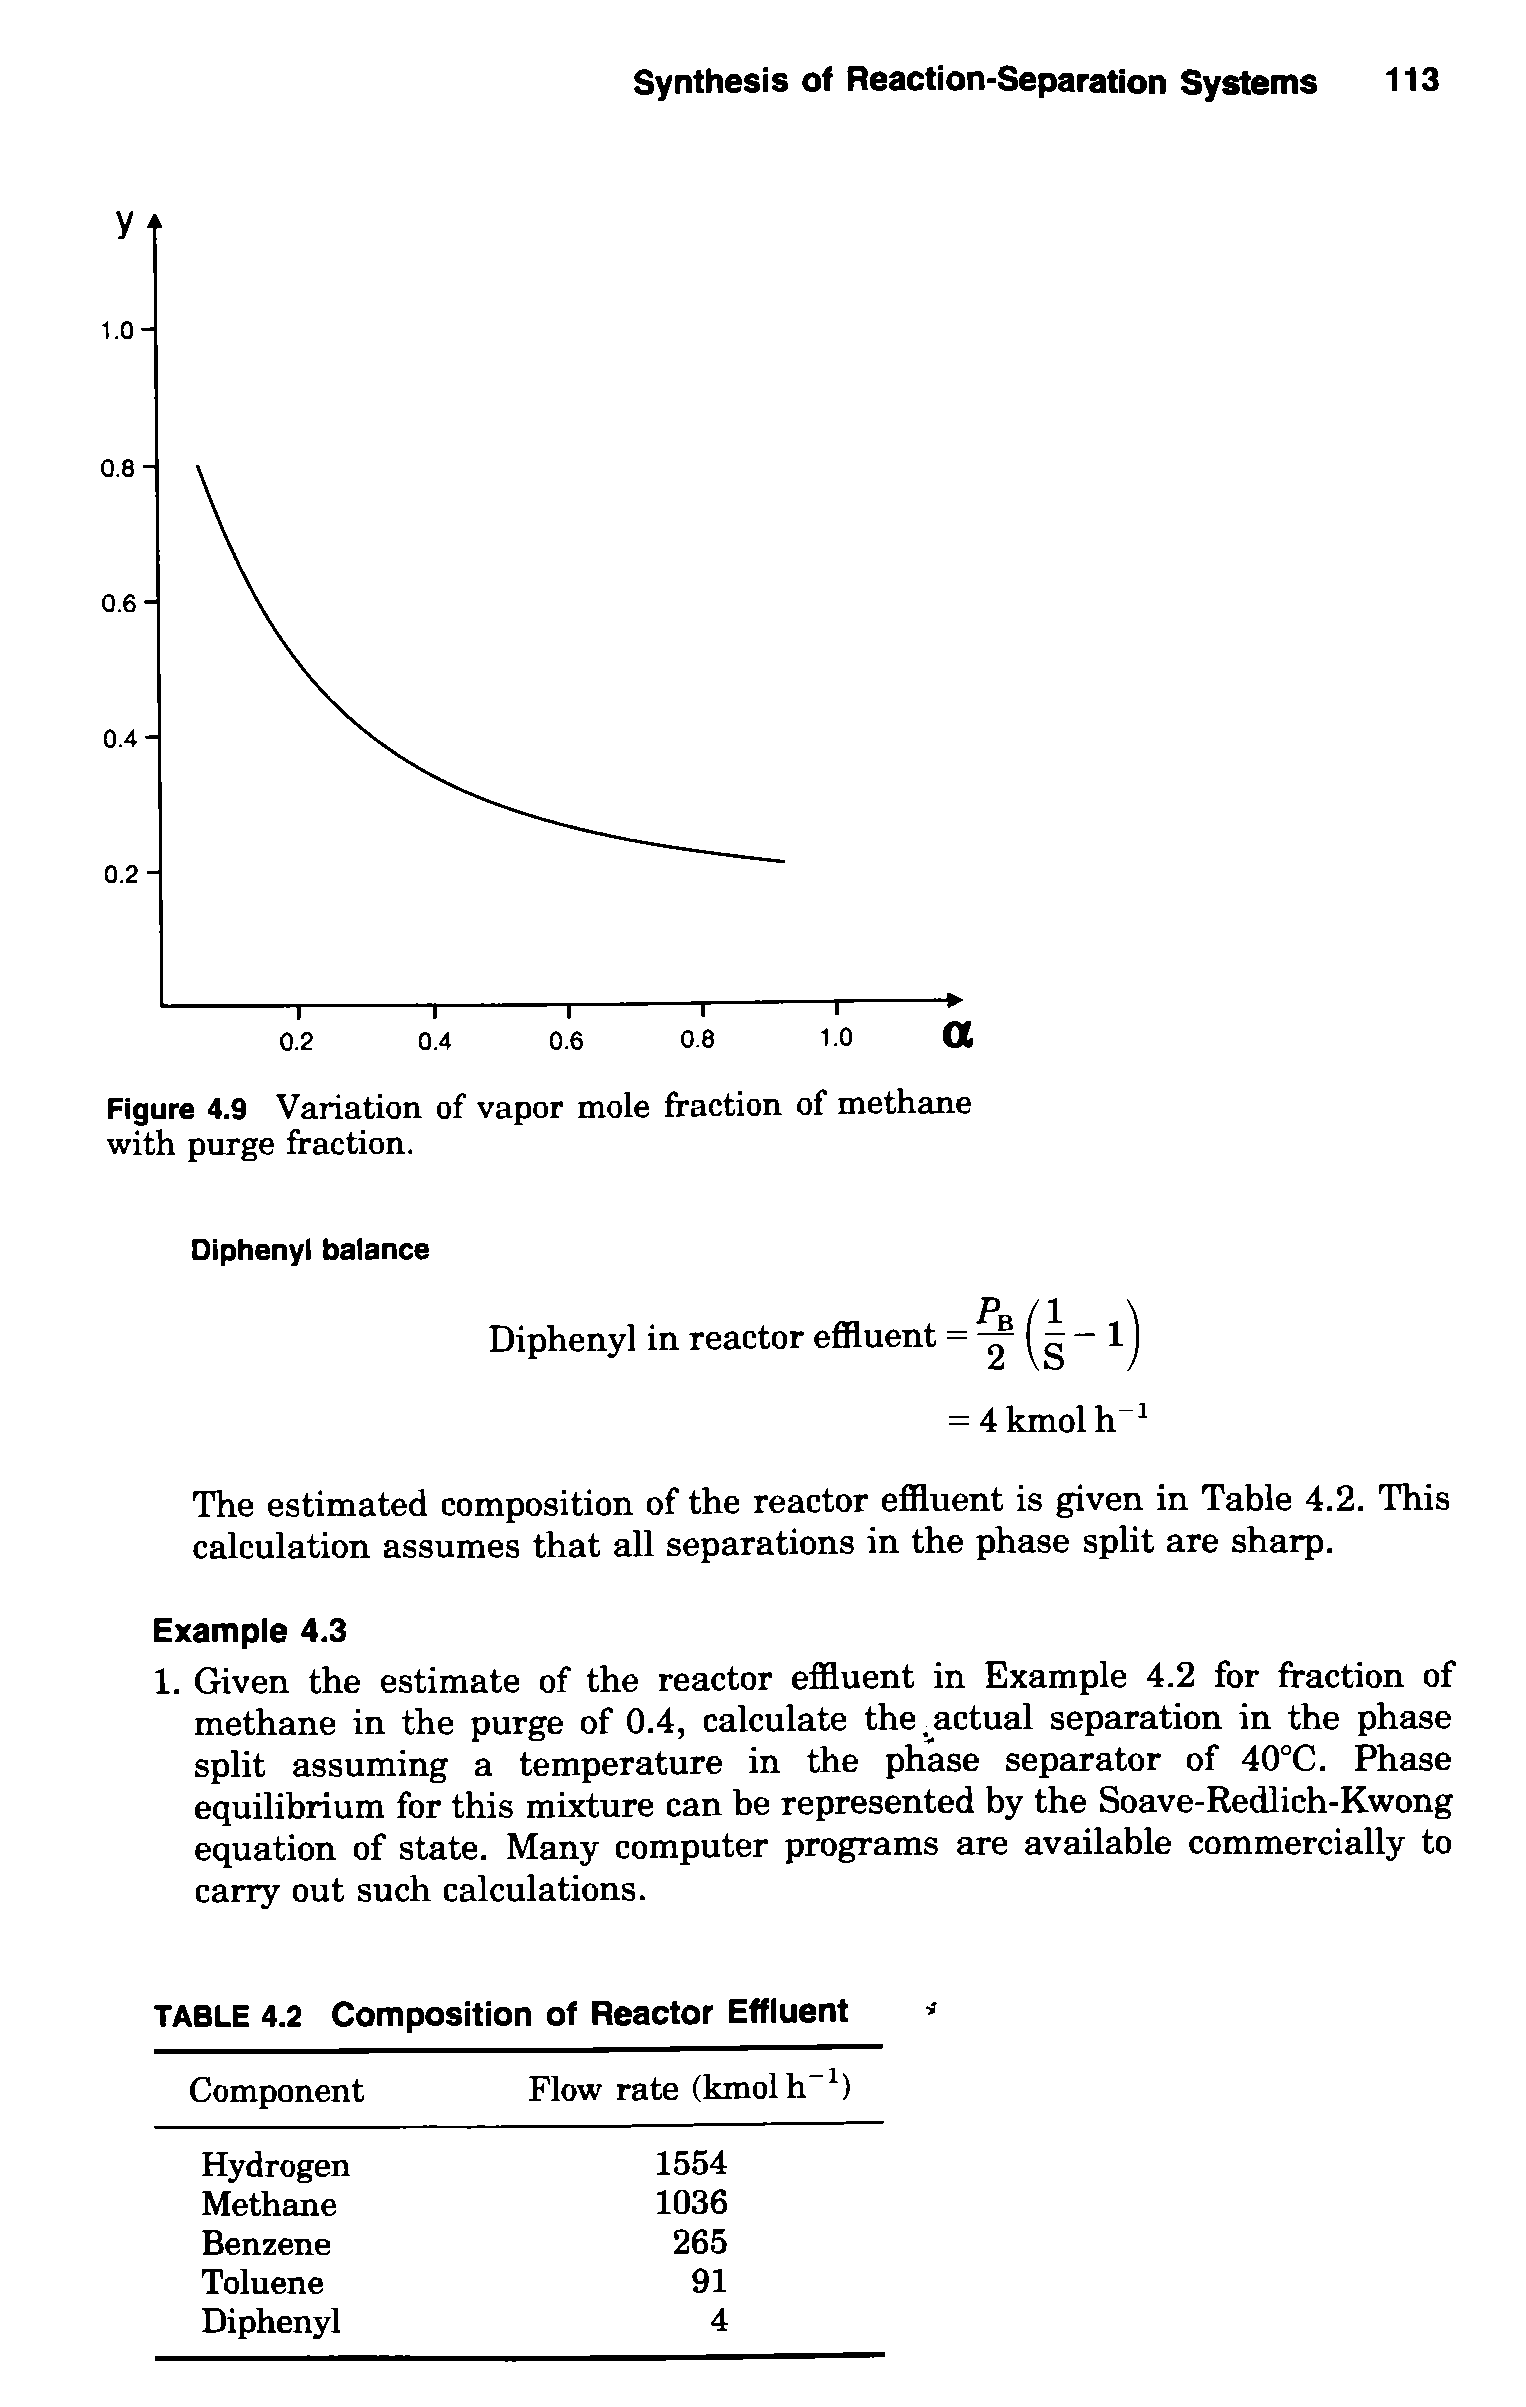 Figure 4.9 Variation of vapor mole fraction of methane with purge fraction.